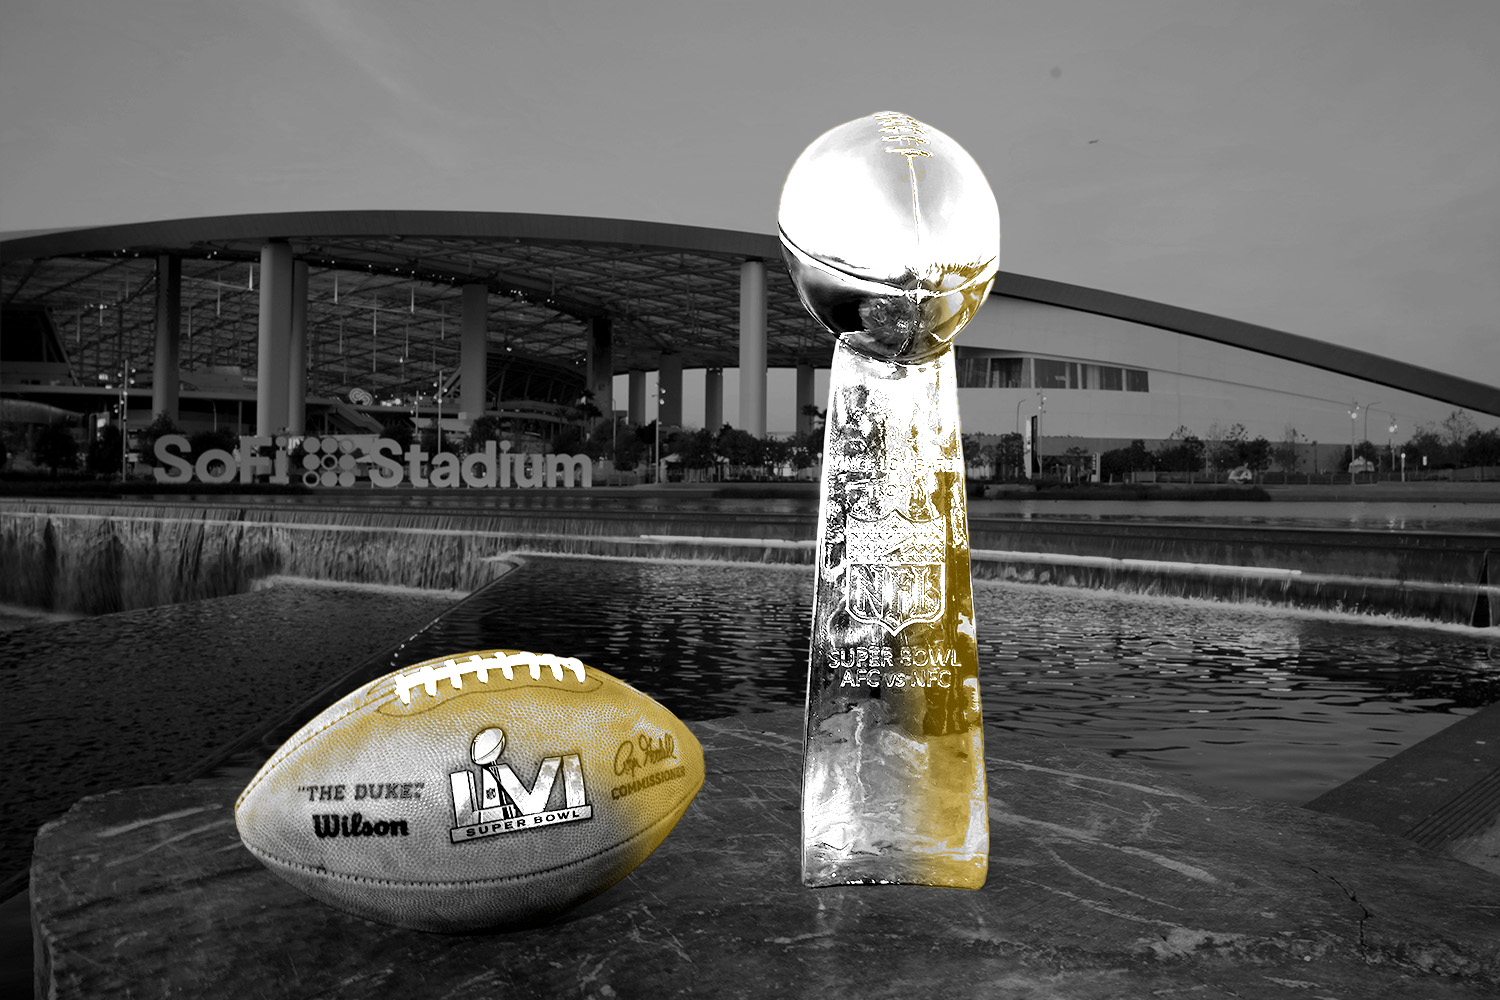 the most expensive super bowl ticket 2022